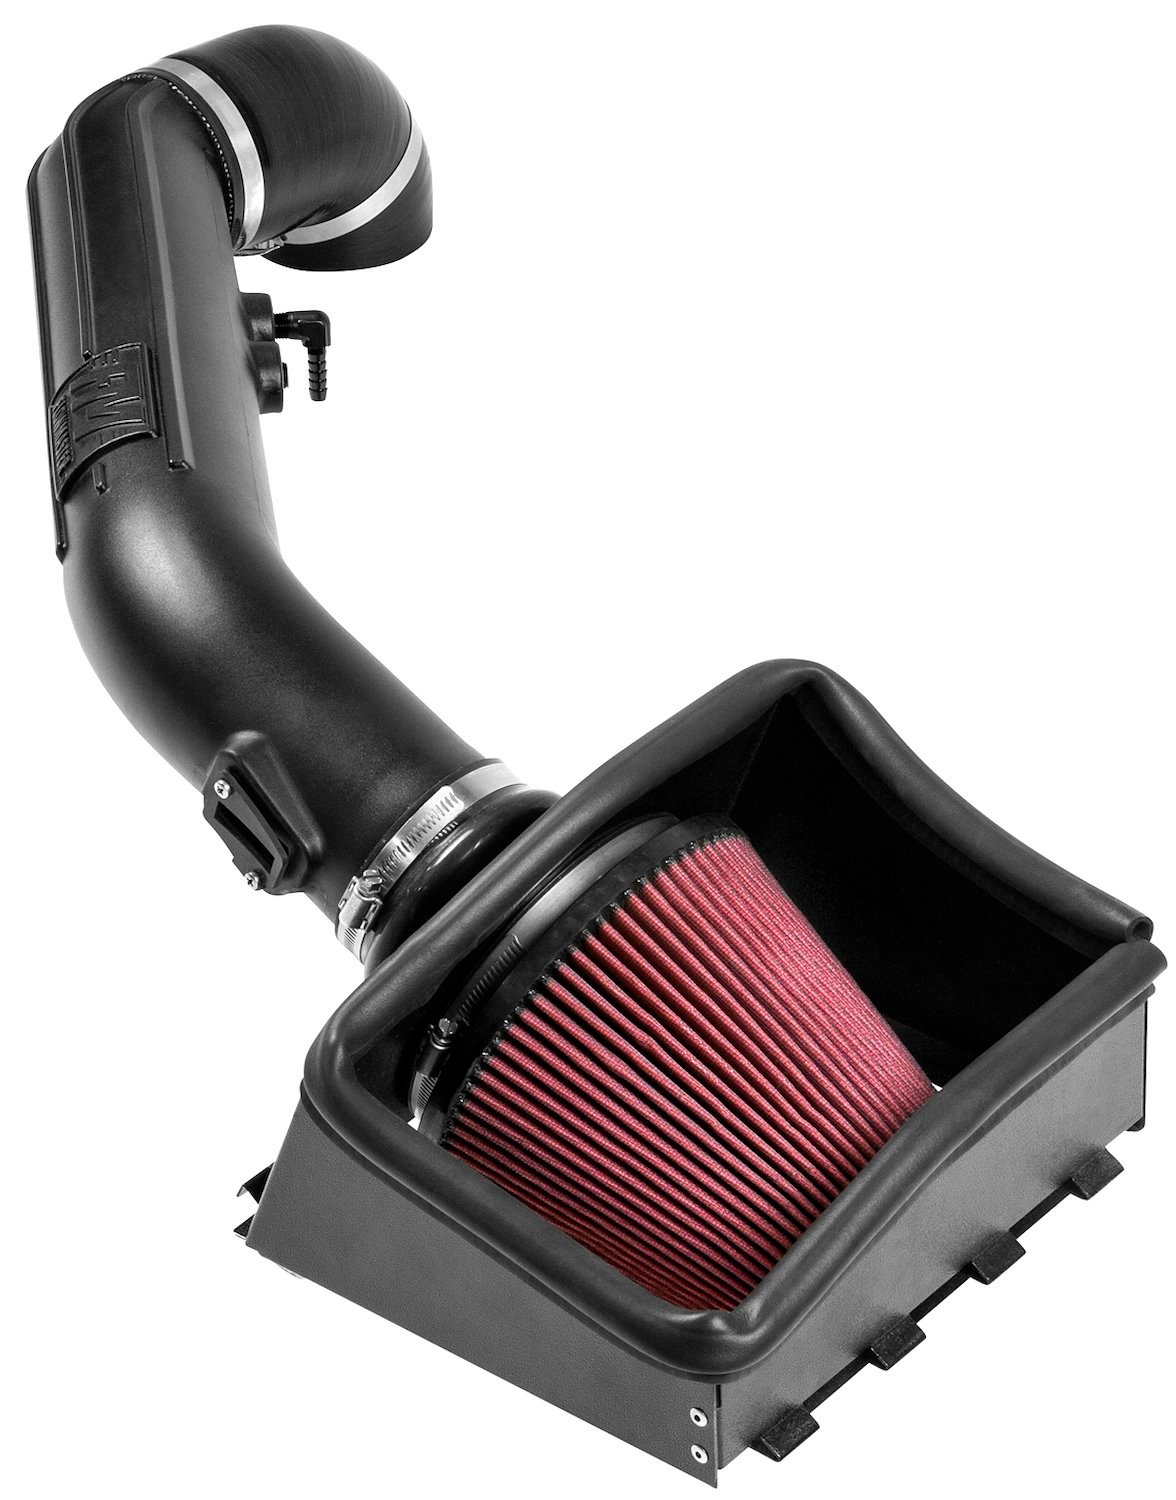 Delta Force Cold Air Intake System 2007-2014 Ford F-150/Expedition, Lincoln Navigator 5.4L V8